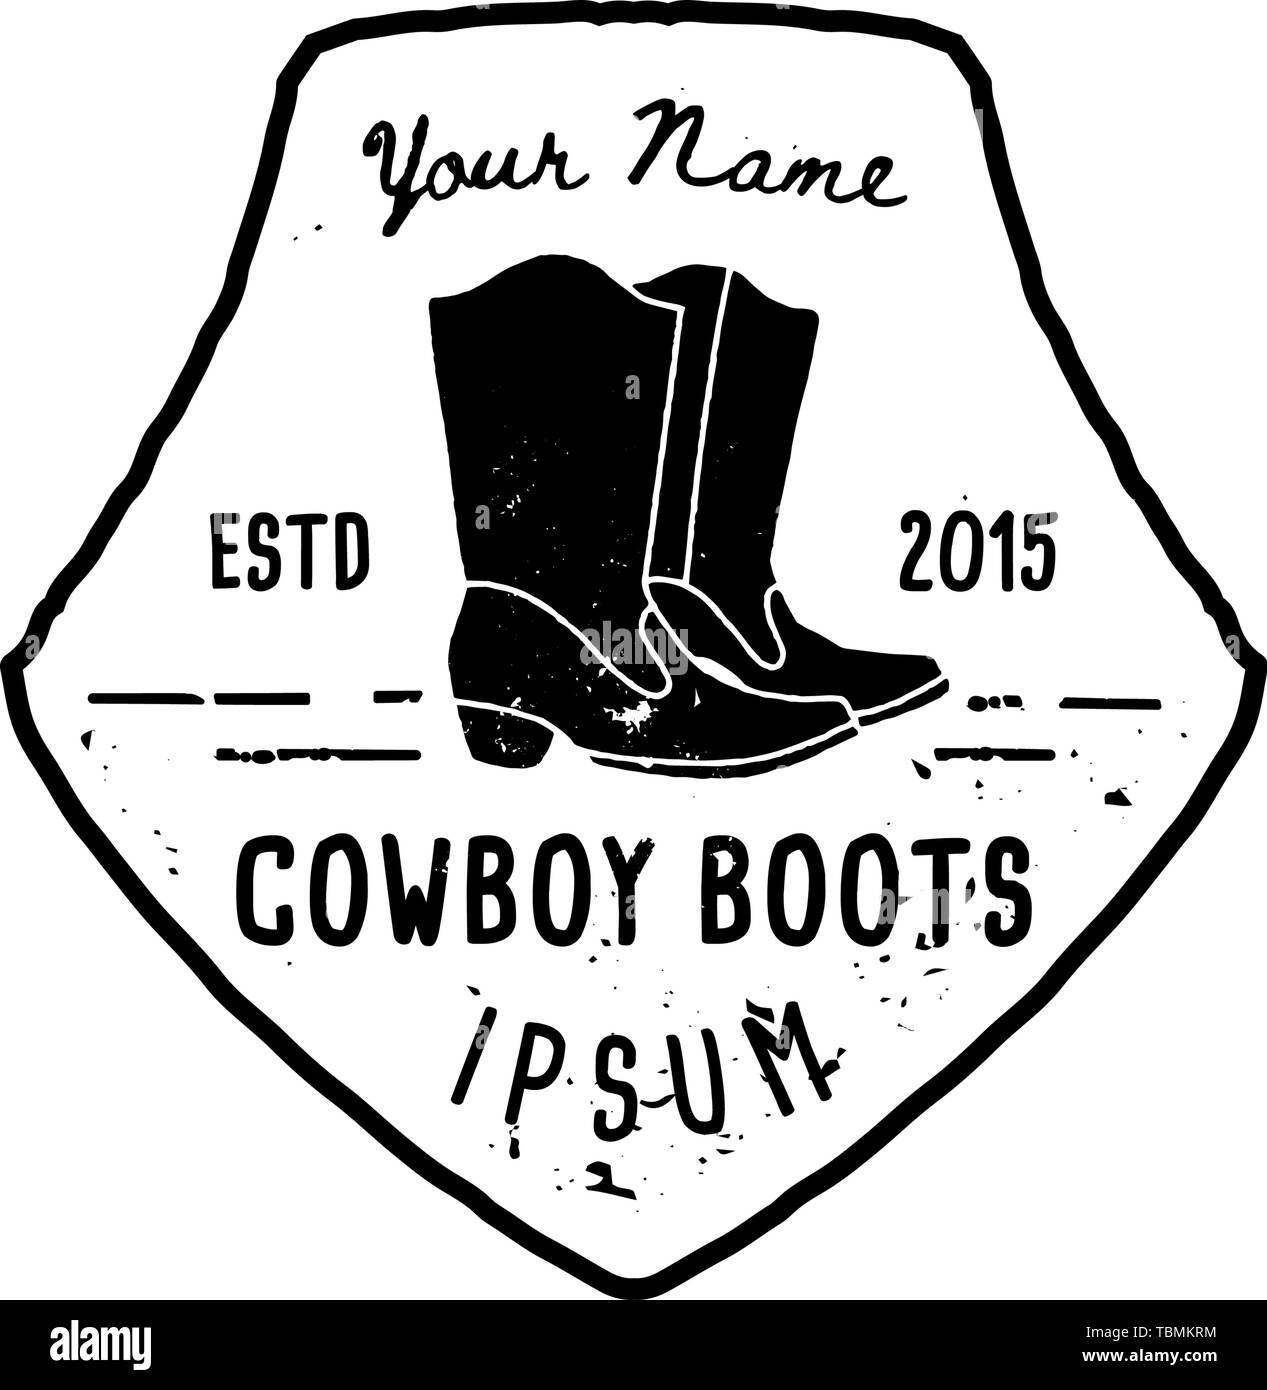 Western Logo cowboy boots hand Draw Grunge style. Wild West symbol sing of a cowboy boots and Retro Typography. Vintage Emblem for hand made cowboy boots, poster, t-shirt, cover, banner Stock Vector